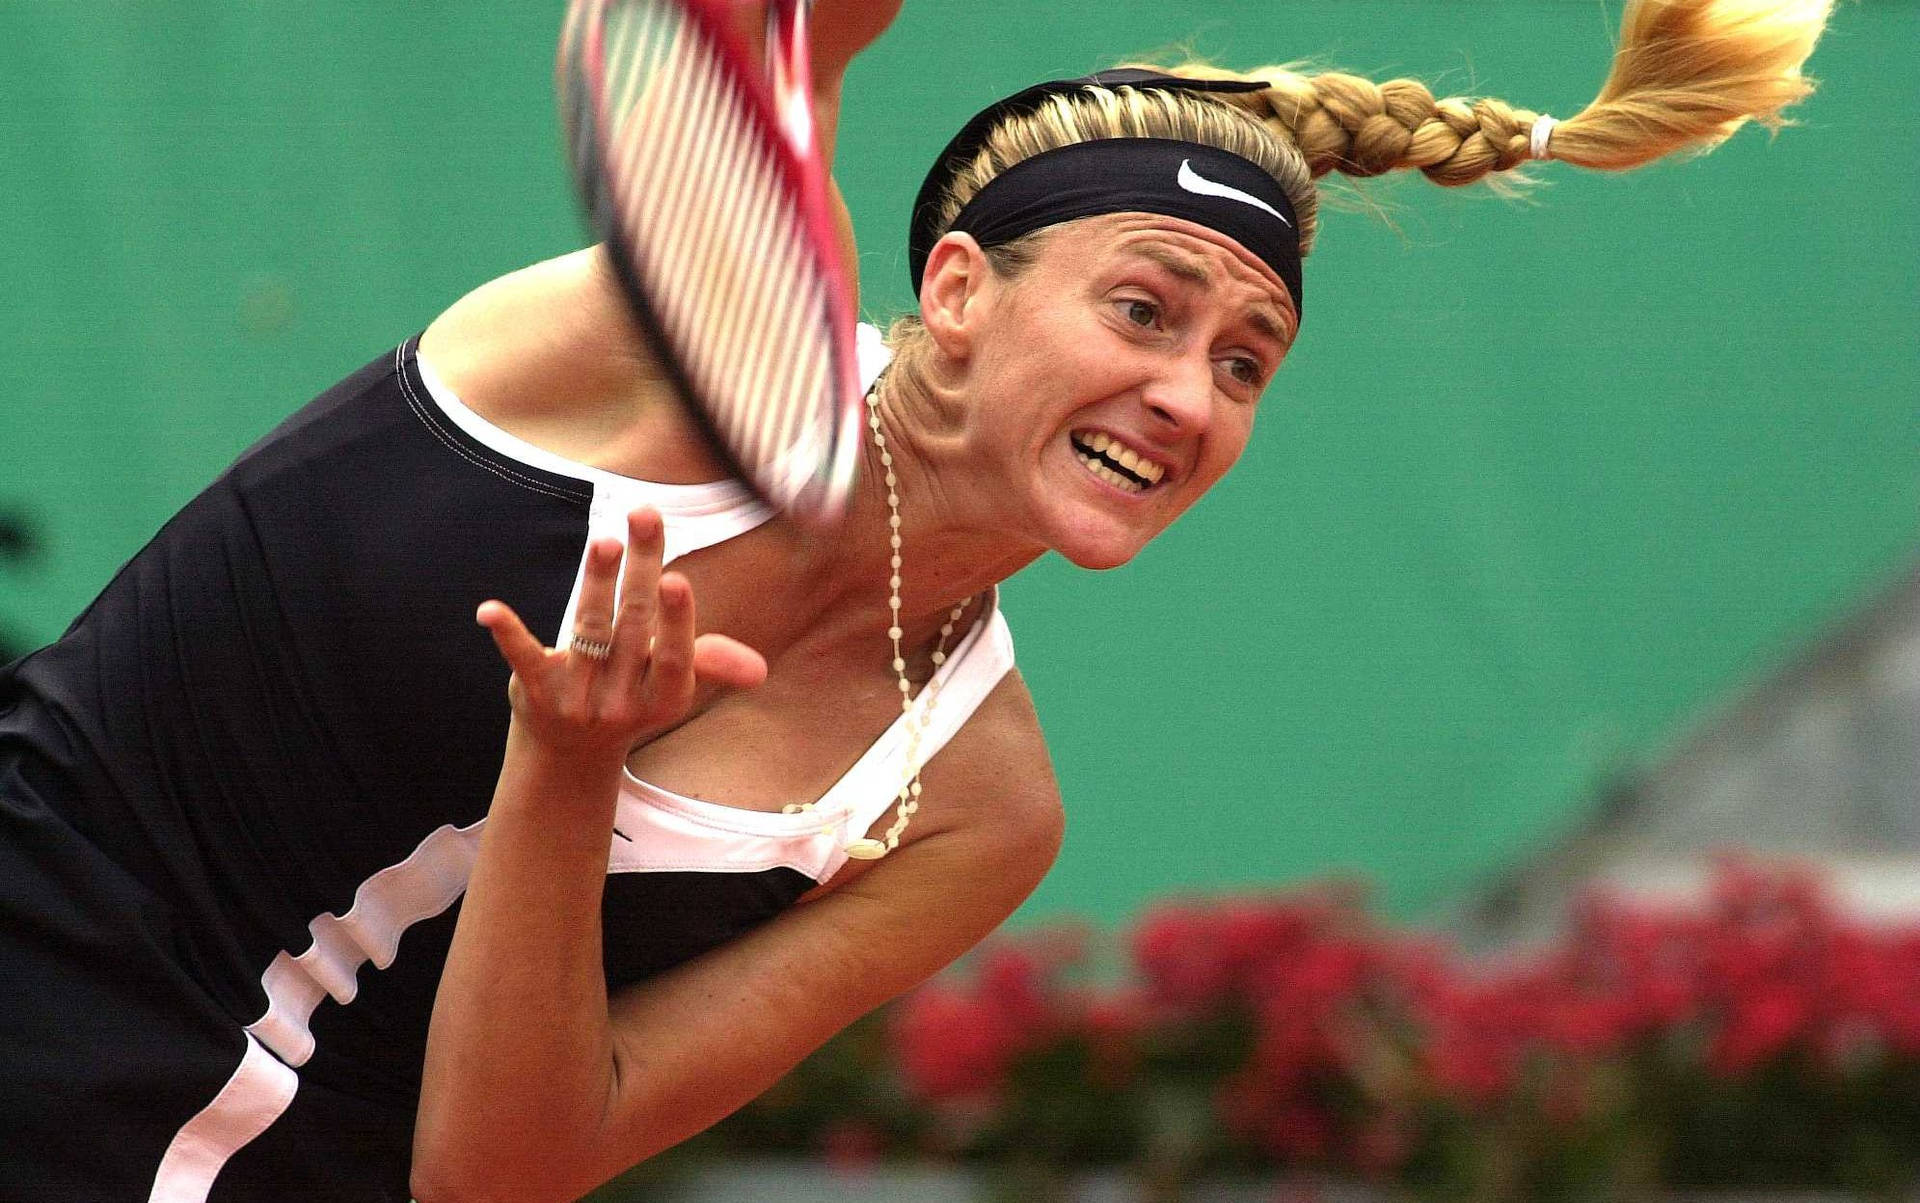 "Mary Pierce in Commanding Form on the Tennis Court" Wallpaper